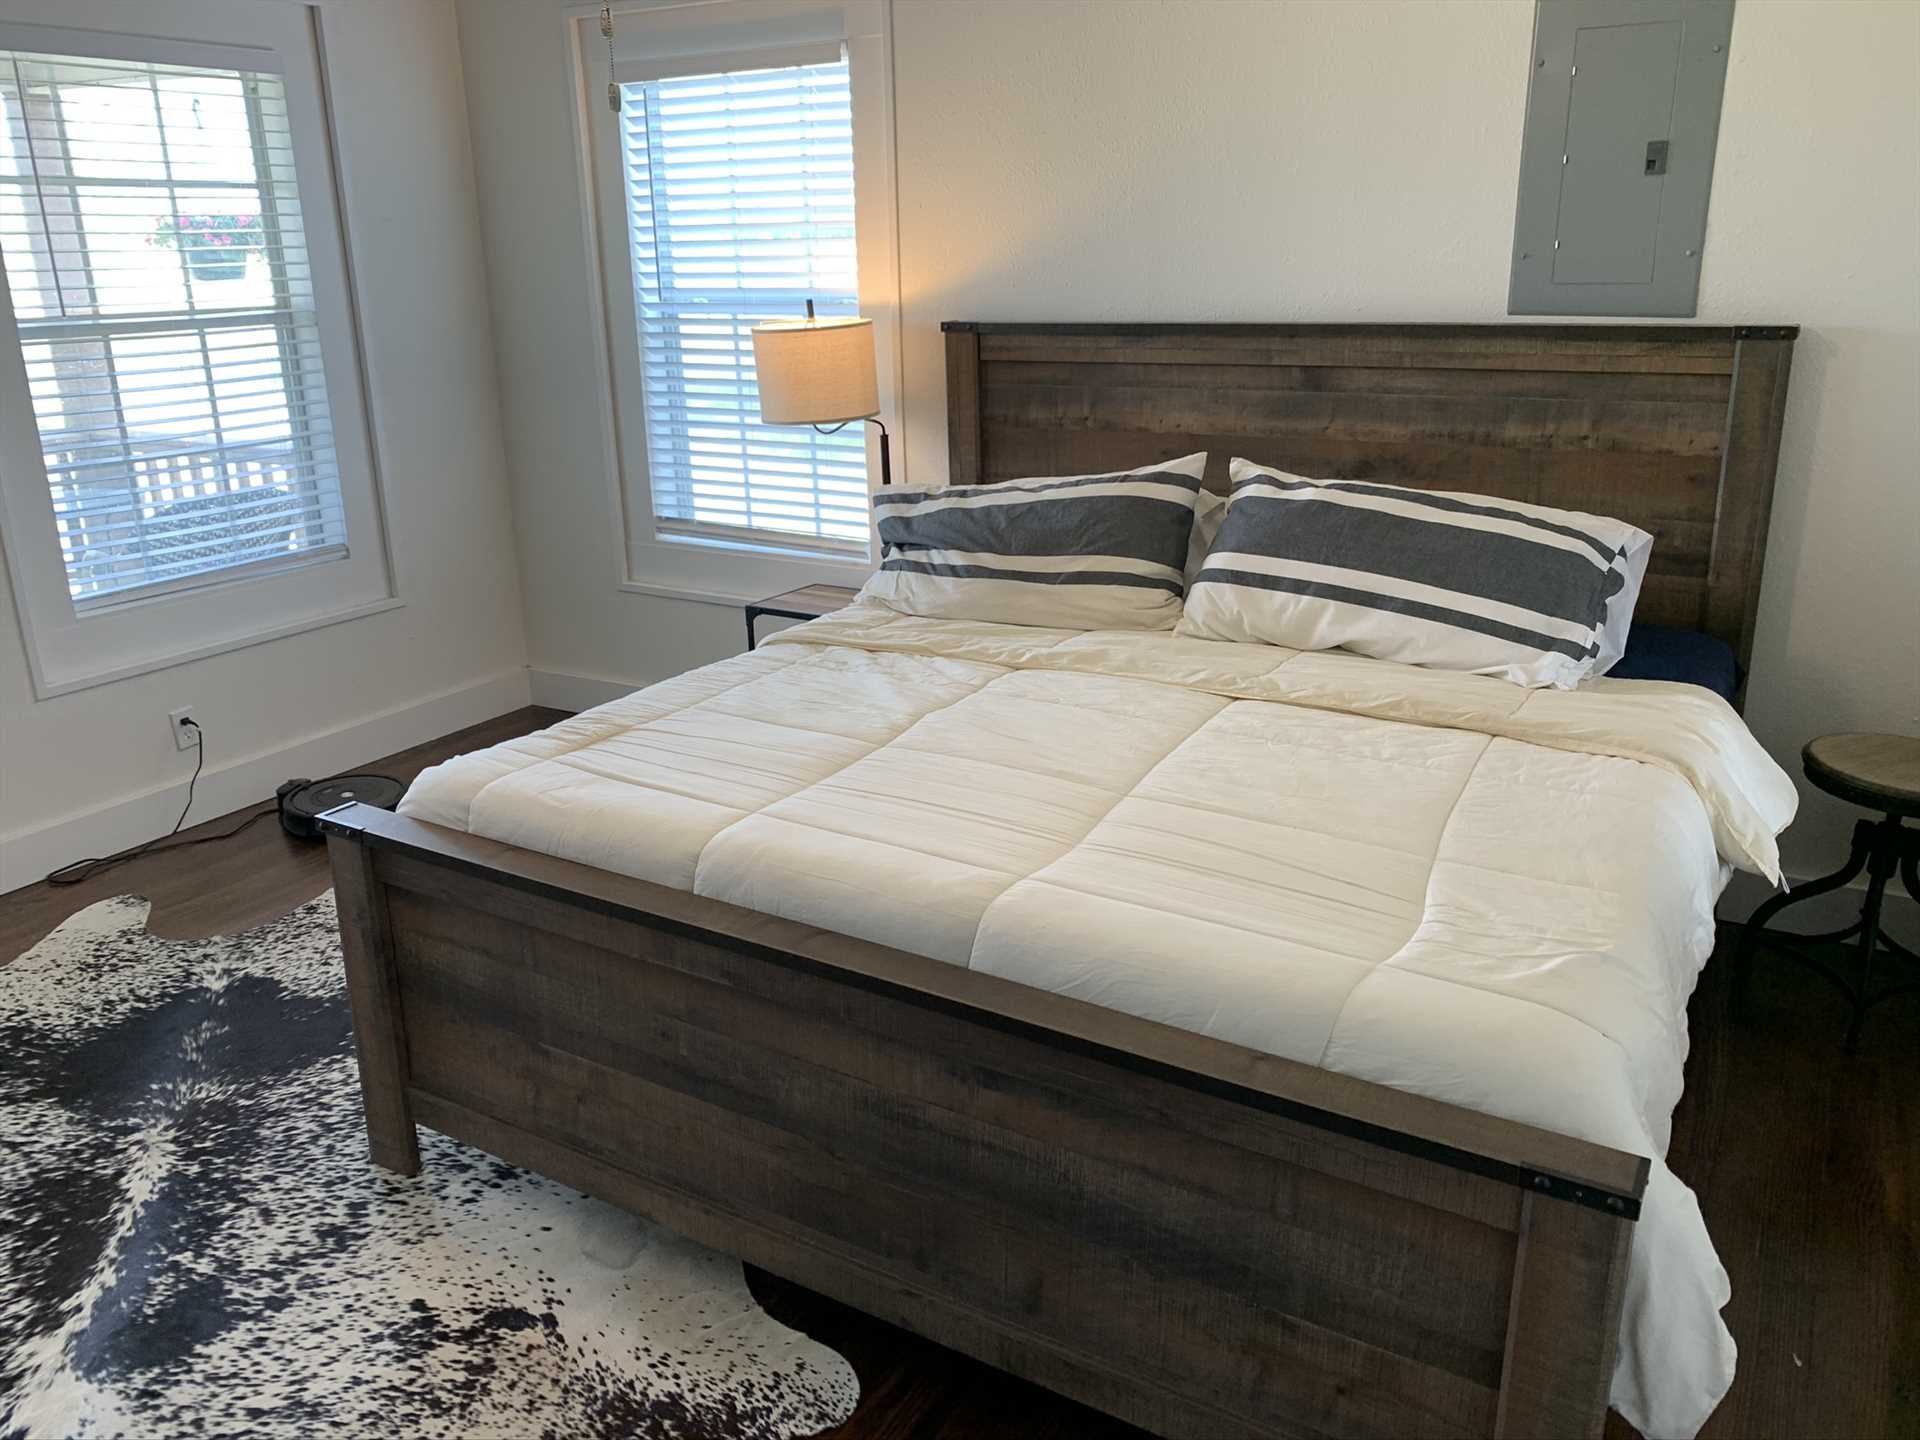                                                 Comforting natural light awakens you in the master bedroom, outfitted with a comfy king-sized bed. Clean and fresh bed and bath linens are all part of your stay!